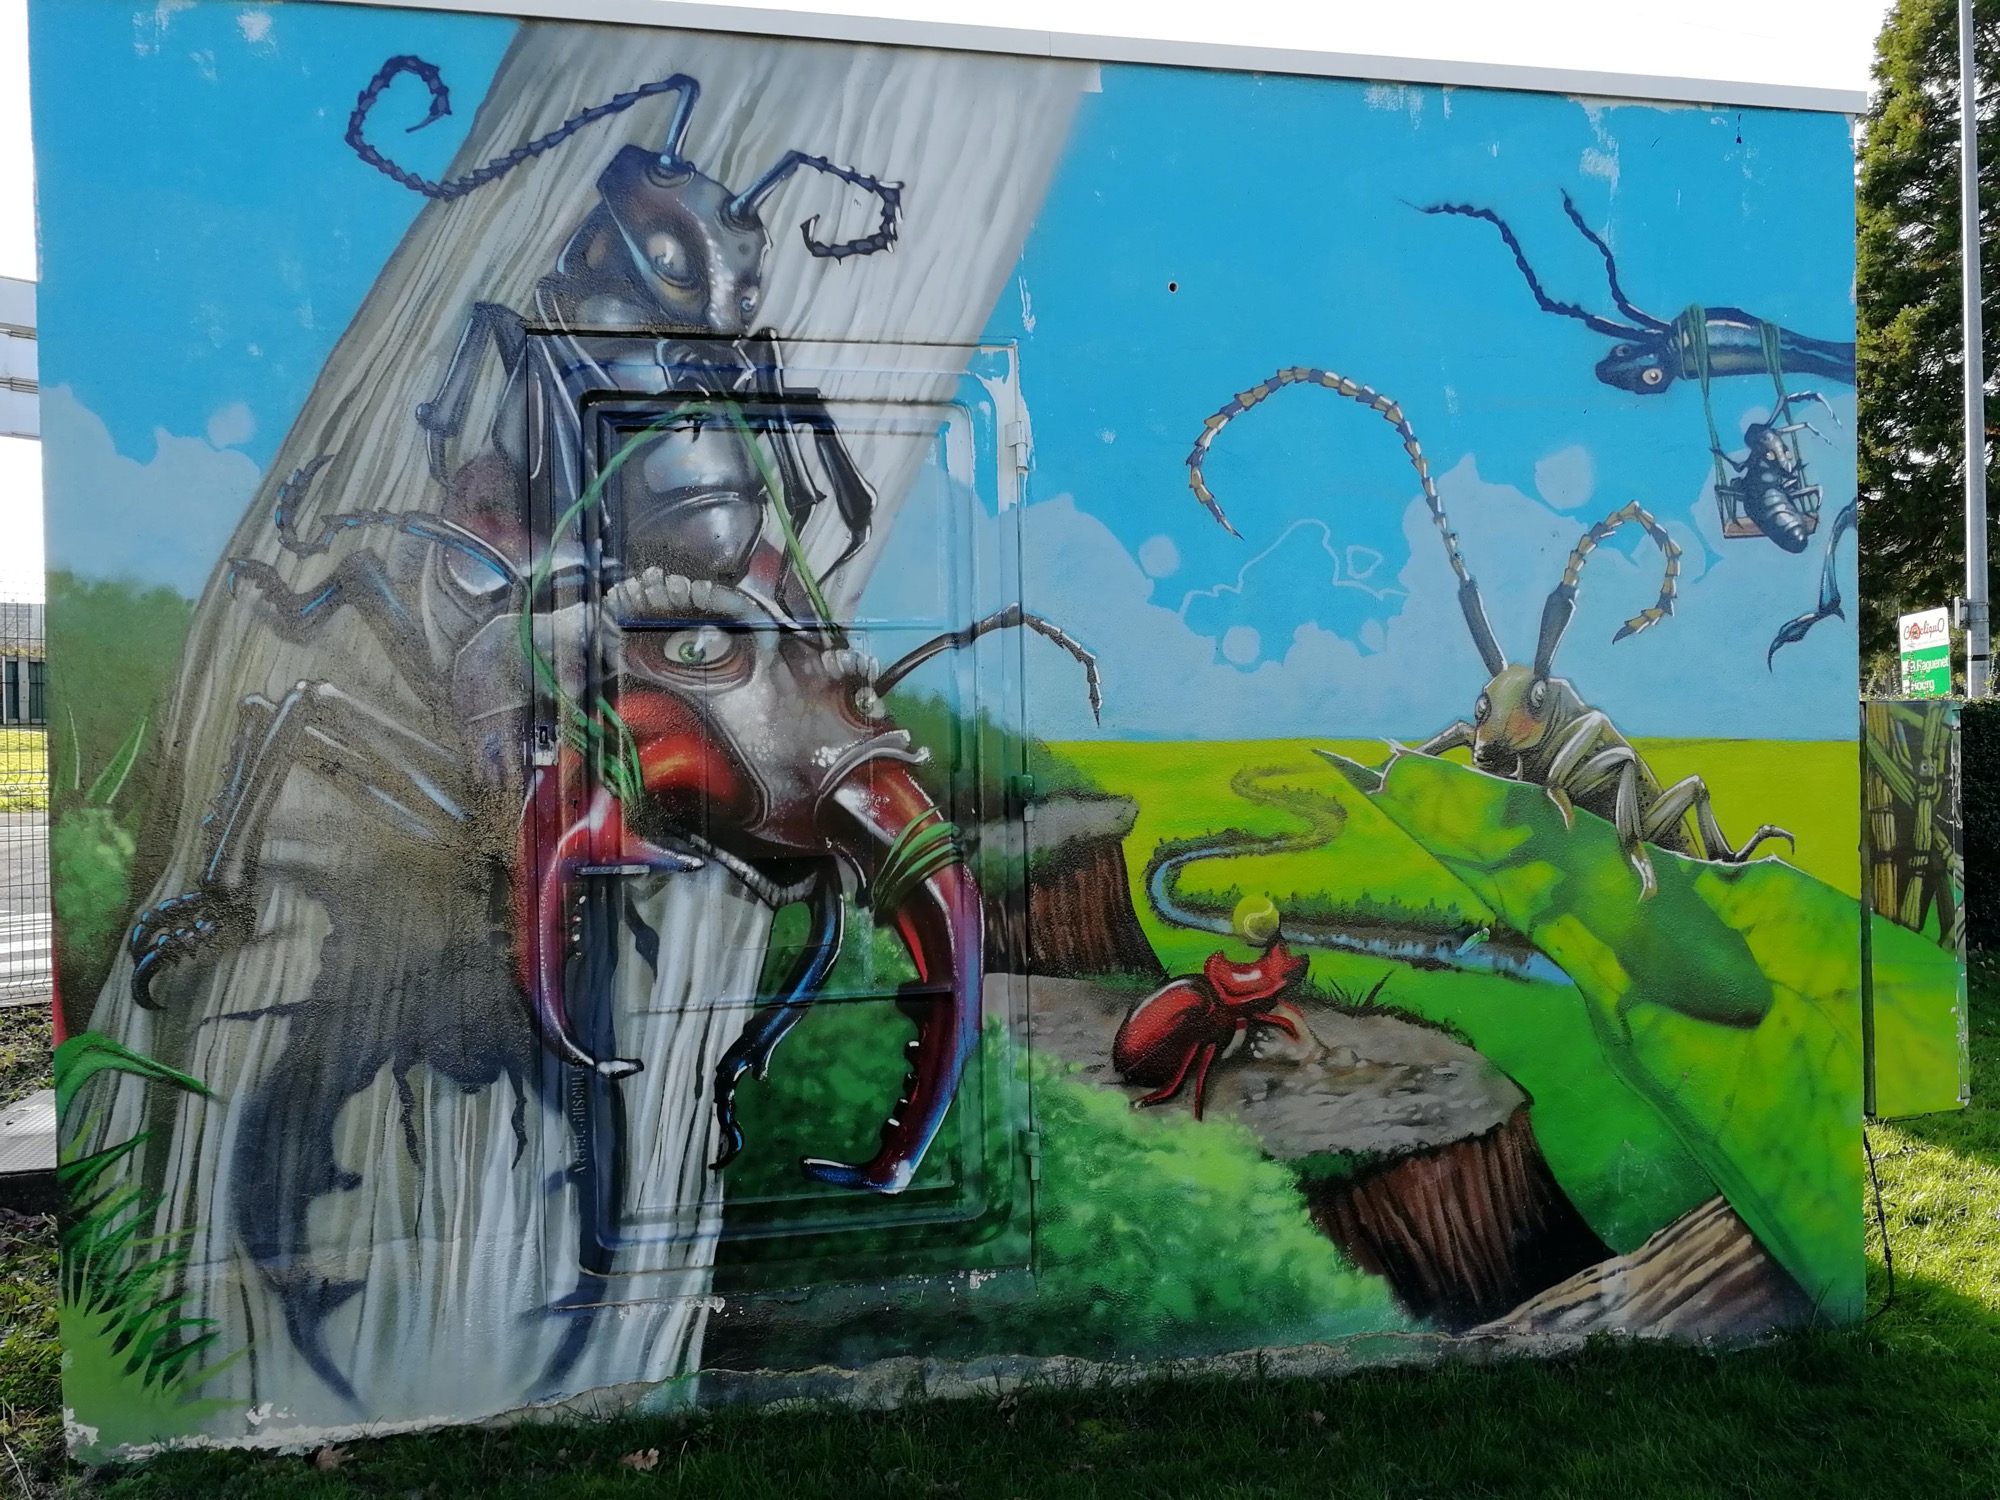 Graffiti 1137  captured by Rabot in Orvault France